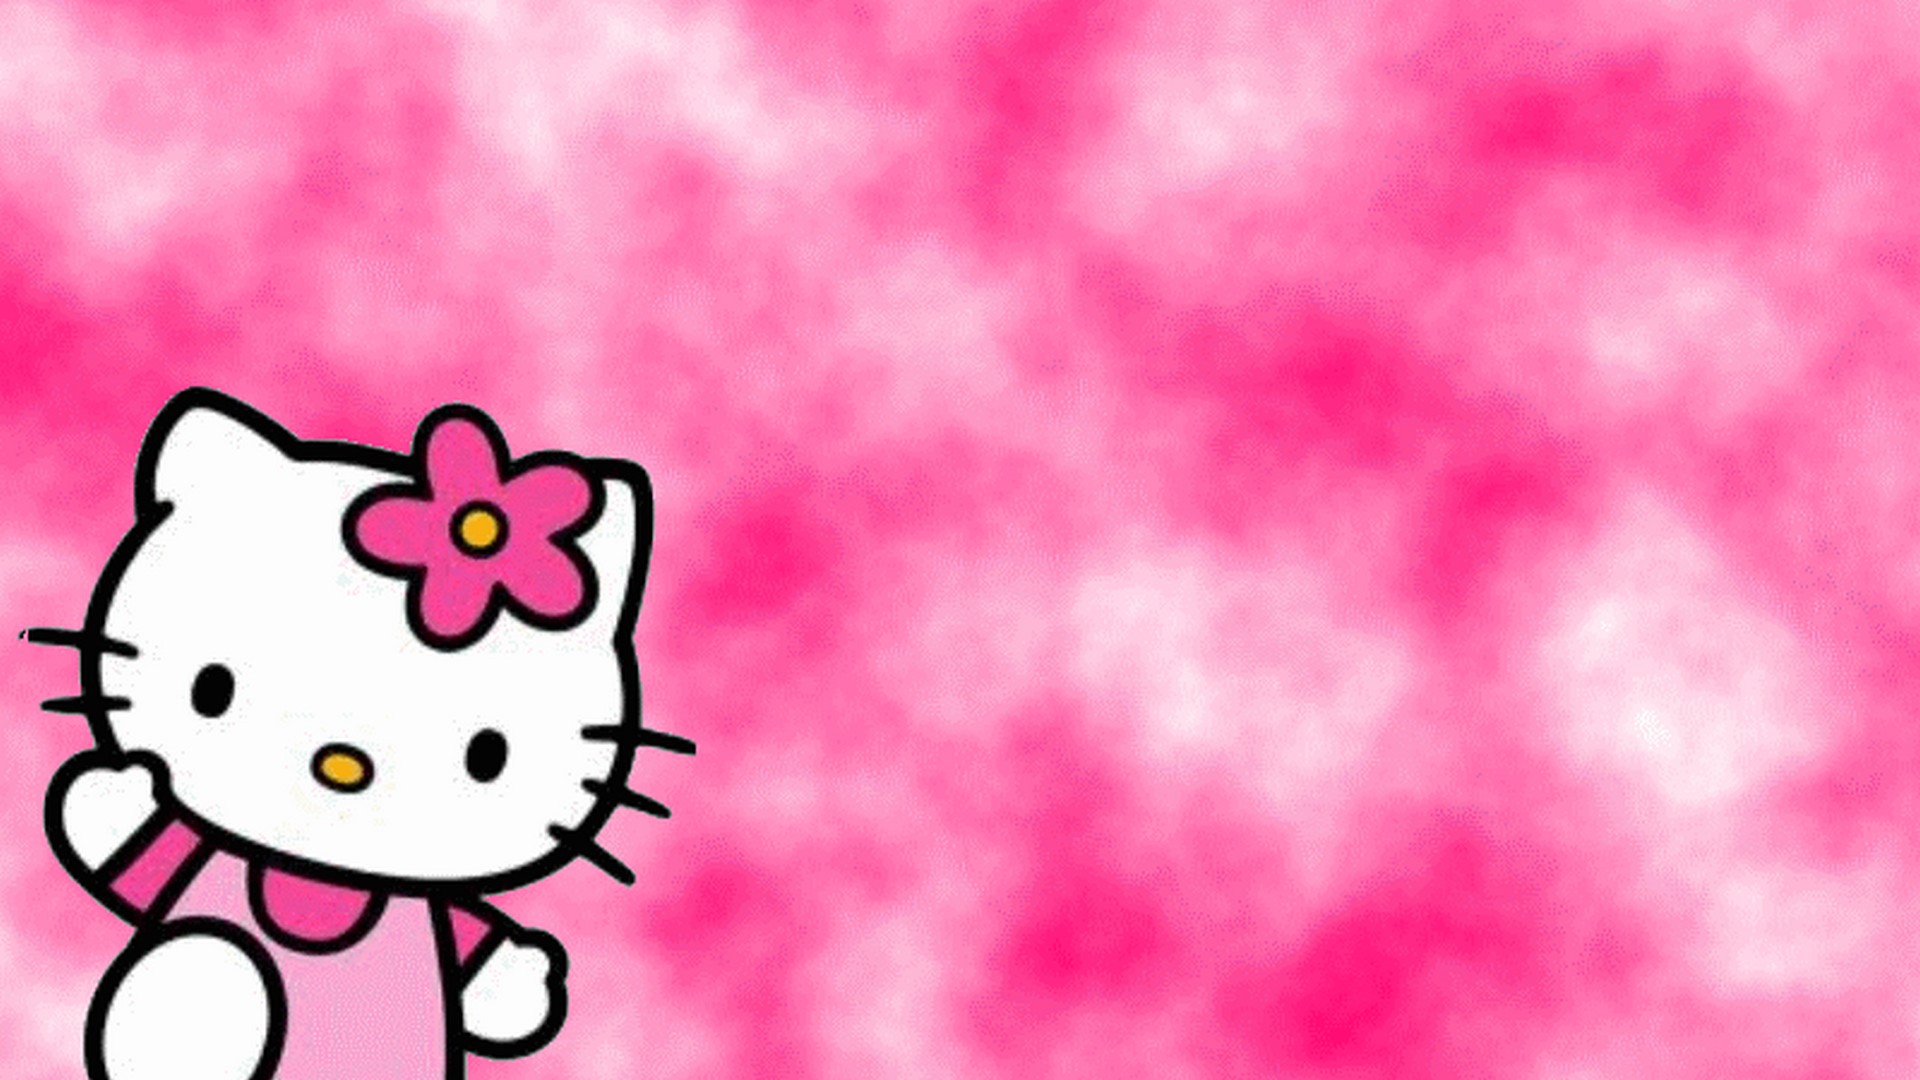 Desktop Wallpaper Kitty with resolution 1920X1080 pixel. You can use this wallpaper as background for your desktop Computer Screensavers, Android or iPhone smartphones